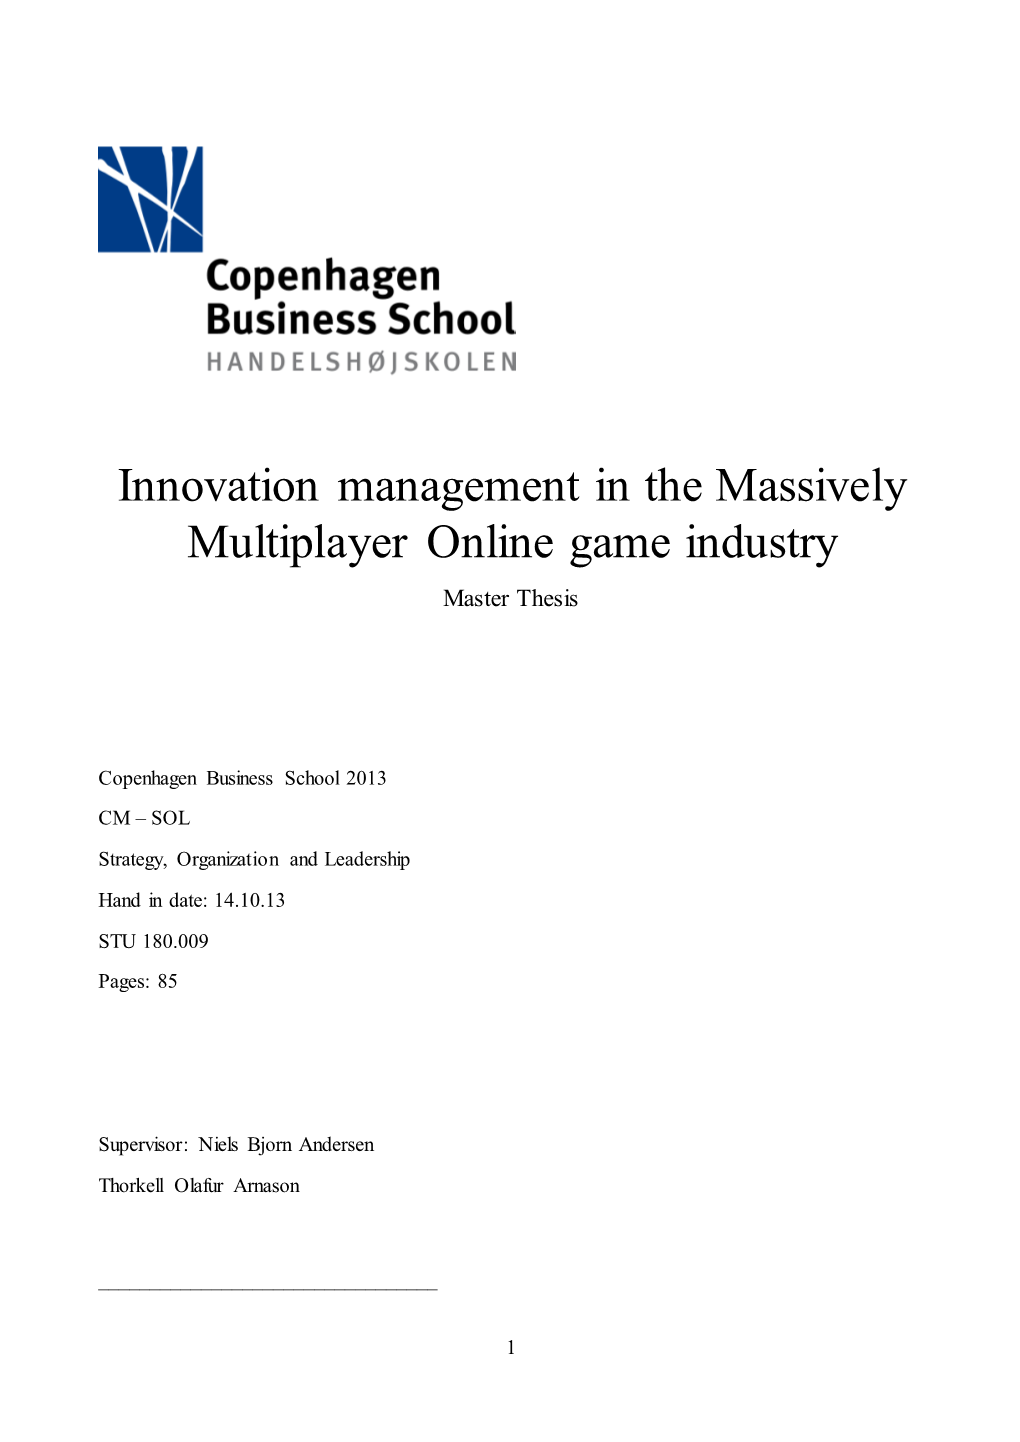 Innovation Management in the Massively Multiplayer Online Game Industry Master Thesis